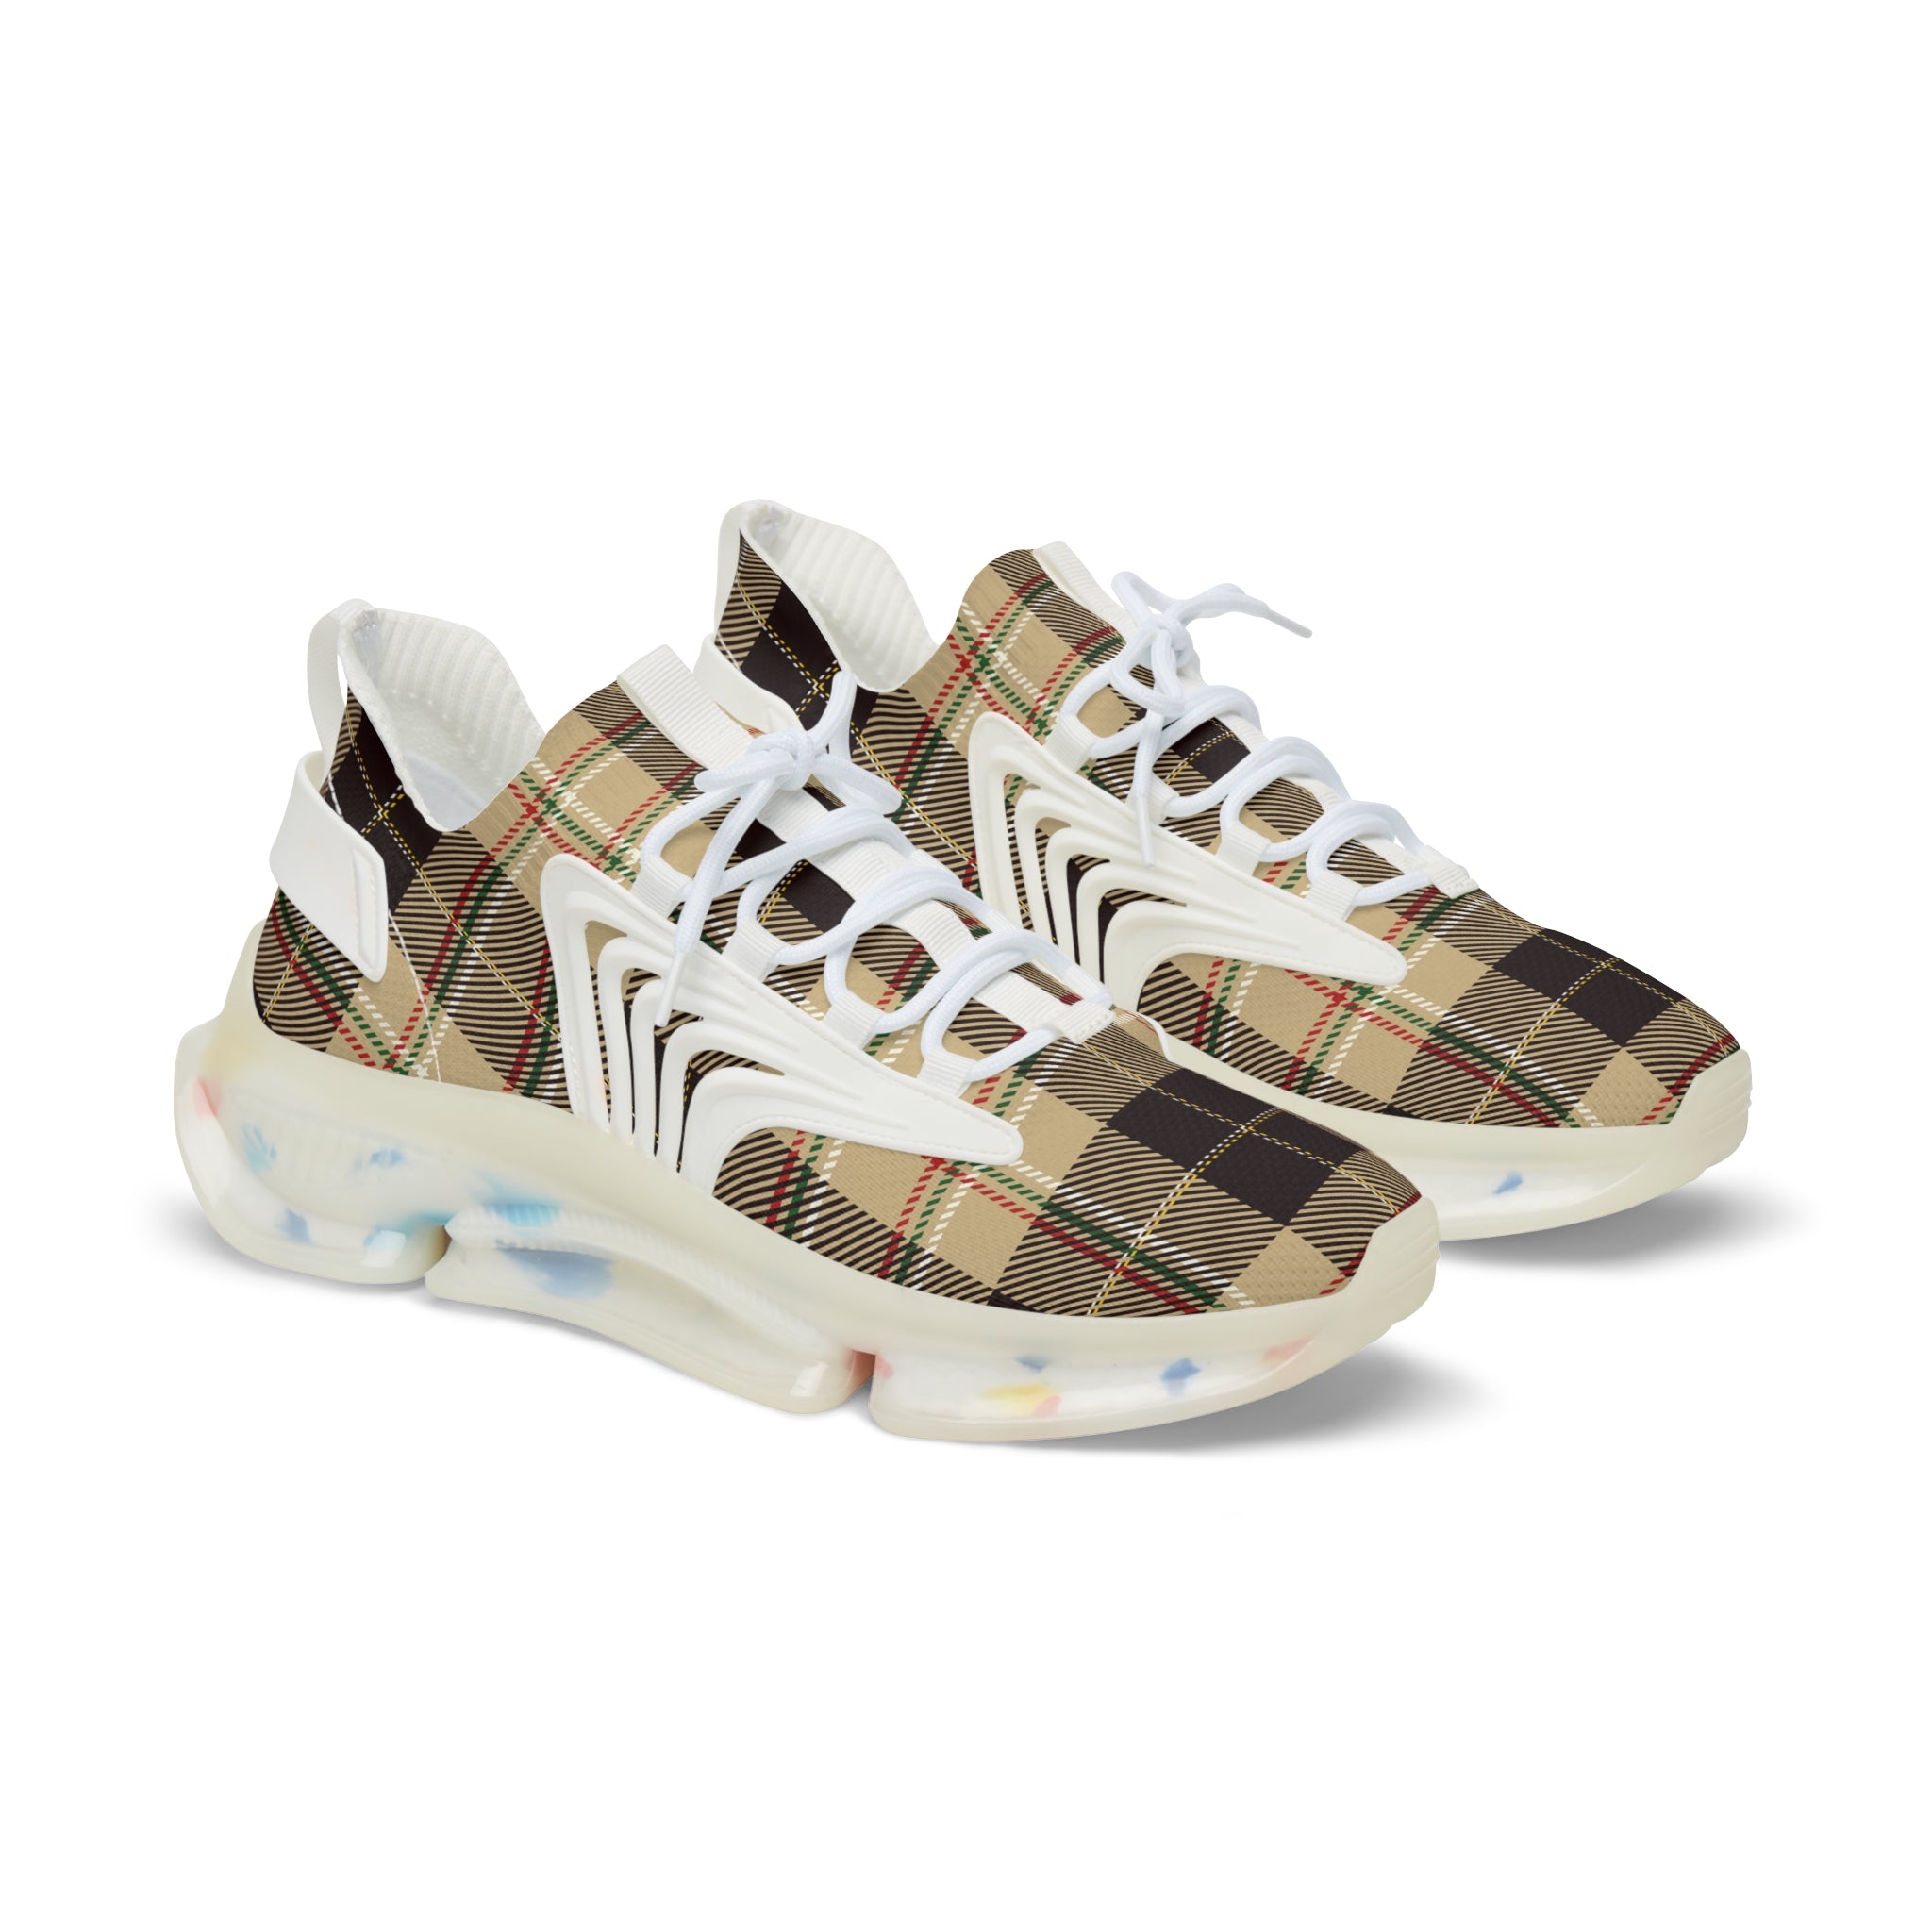  Groove Collection Dark Brown Plaid Men's Mesh Sneakers with Black or White Sole ShoesWhitesoleUS12